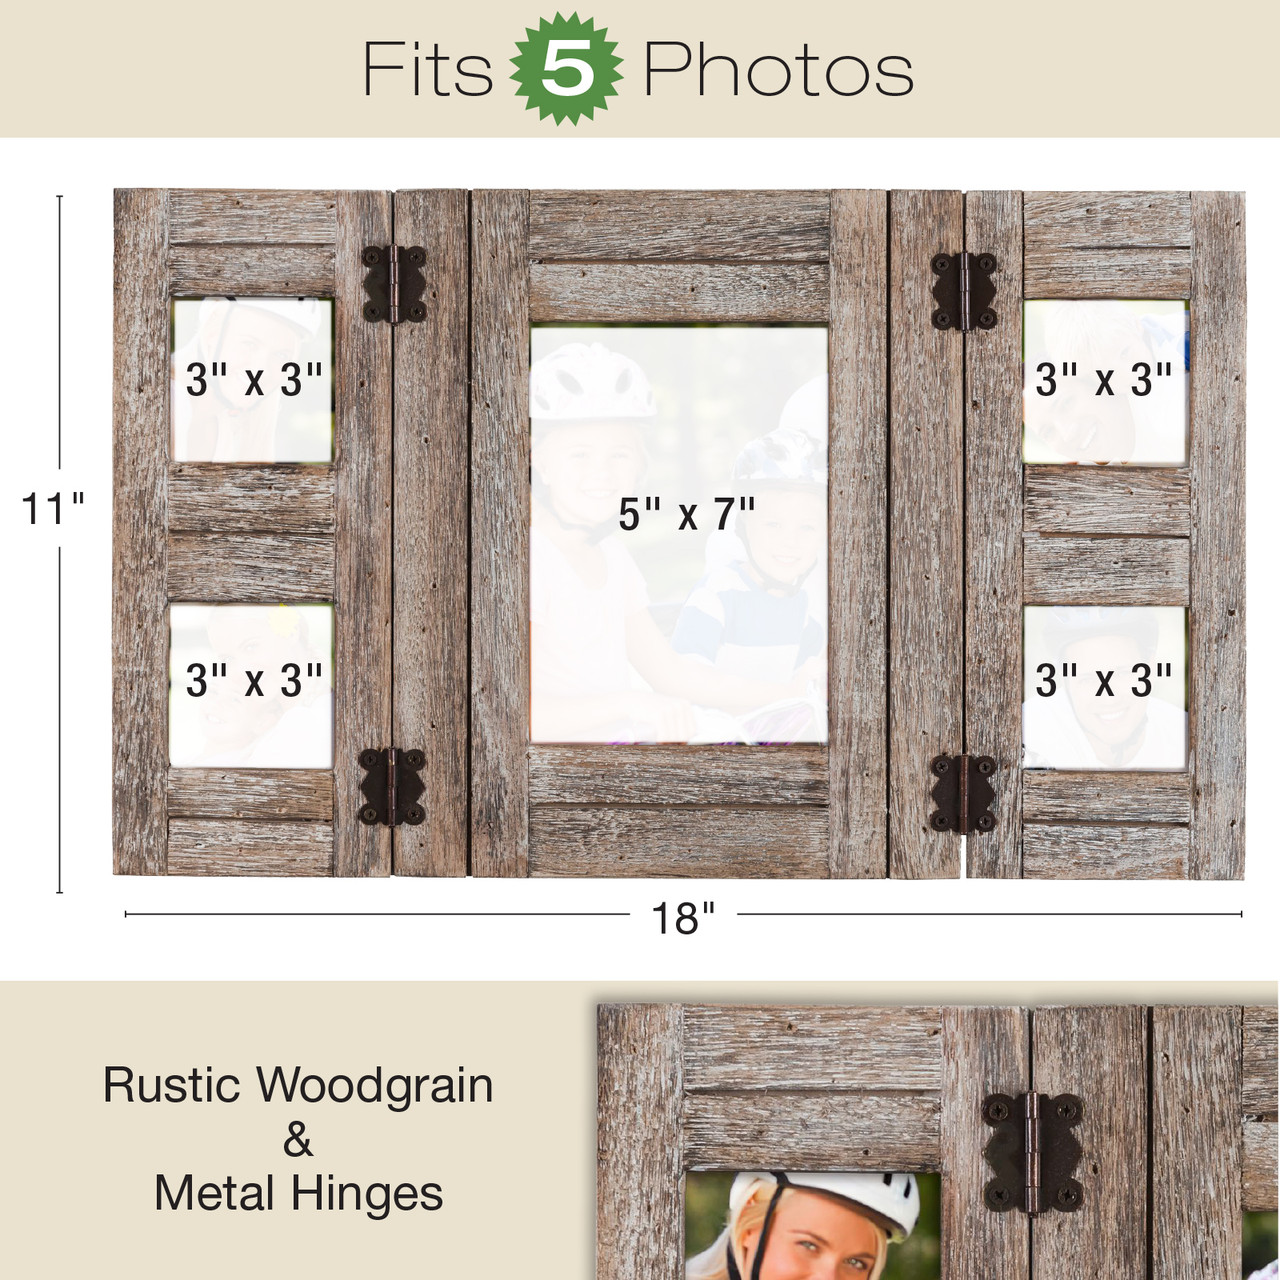 Excello Global Products Vintage Farmhouse Window Photo Frame: Rustic Hanging Distressed Wood Collage Picture Frame. Holds Four 4x6 or 5x7 Photos